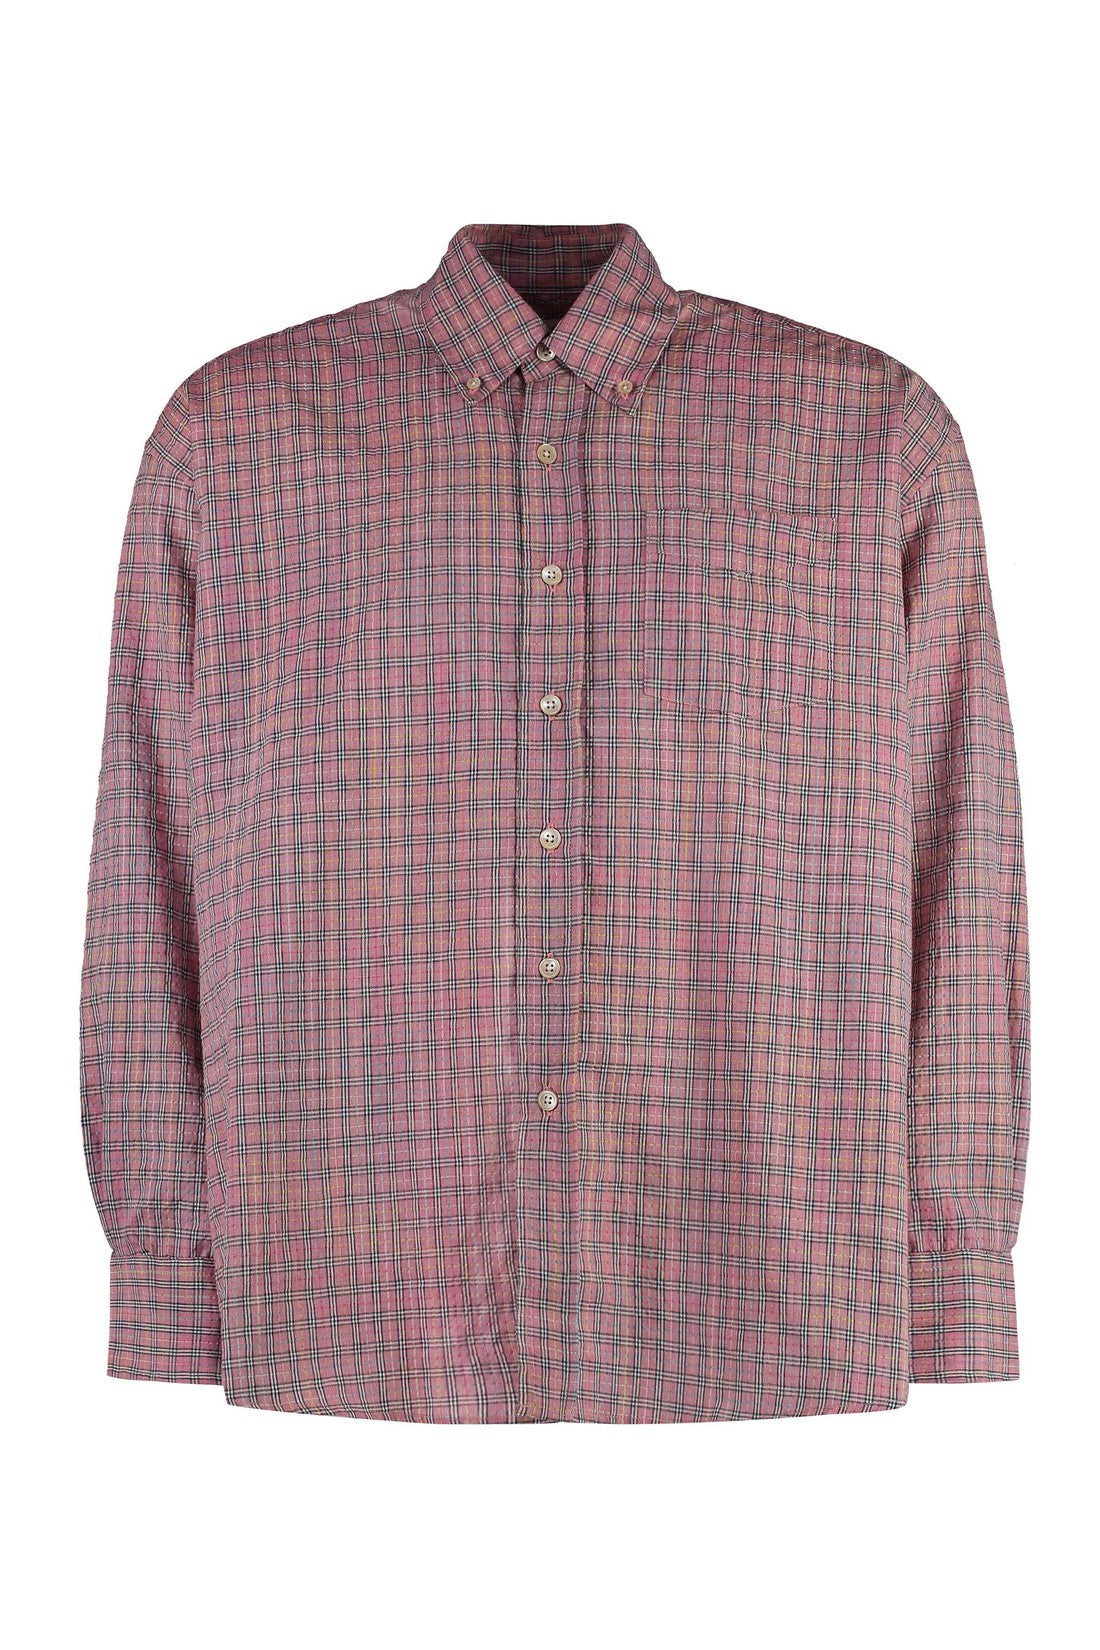 Our Legacy-OUTLET-SALE-Borrowed Bd Checked cotton shirt-ARCHIVIST